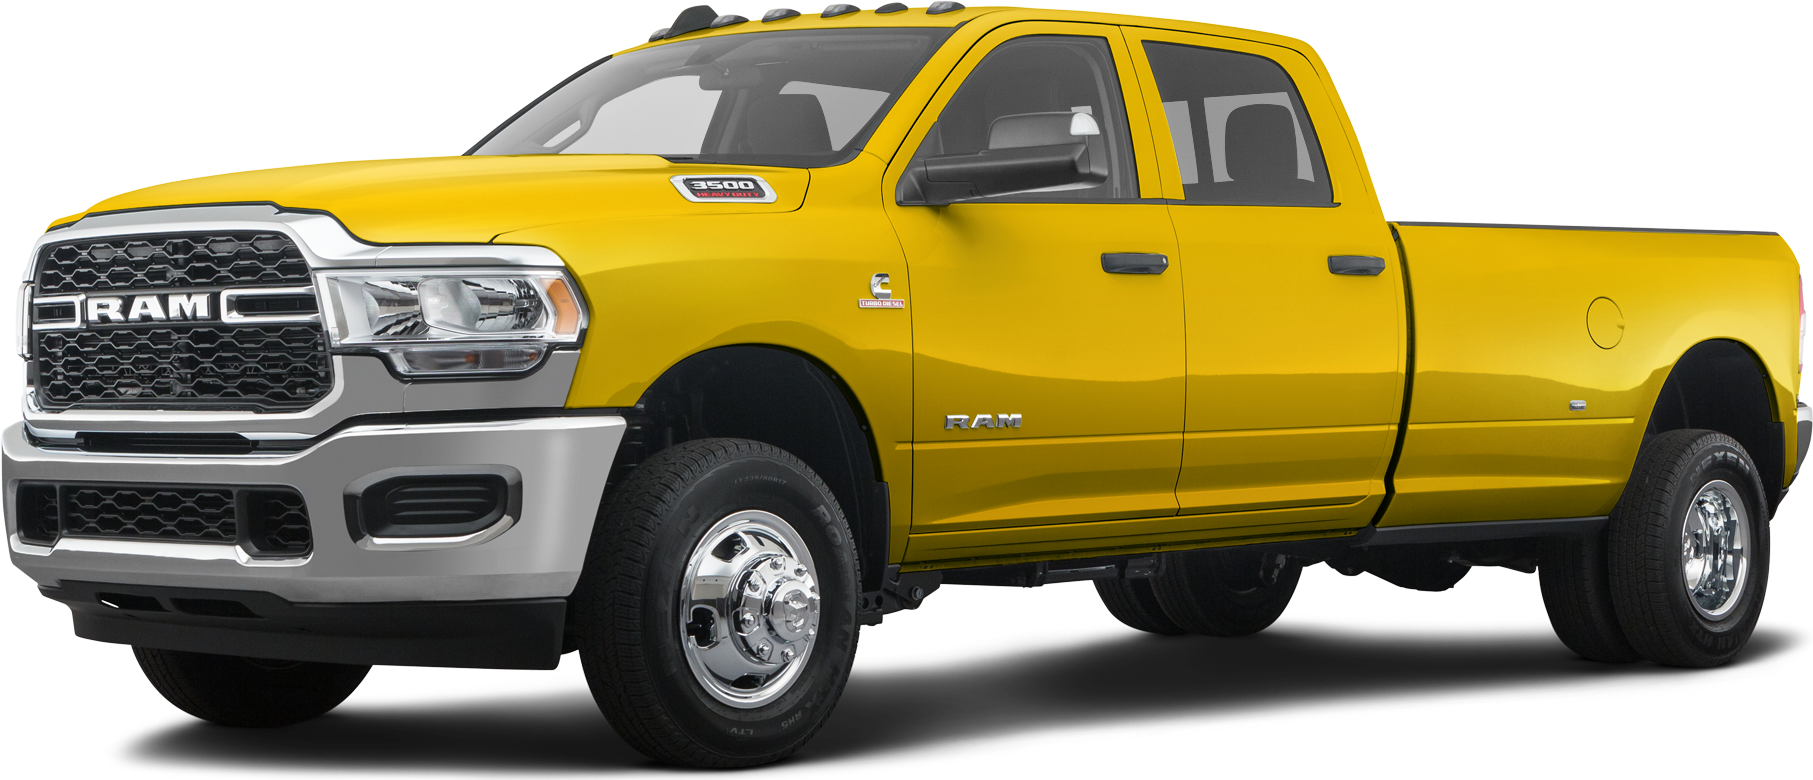 Implement ballet Børnepalads 2022 Ram 3500 Crew Cab Price, Reviews, Pictures & More | Kelley Blue Book